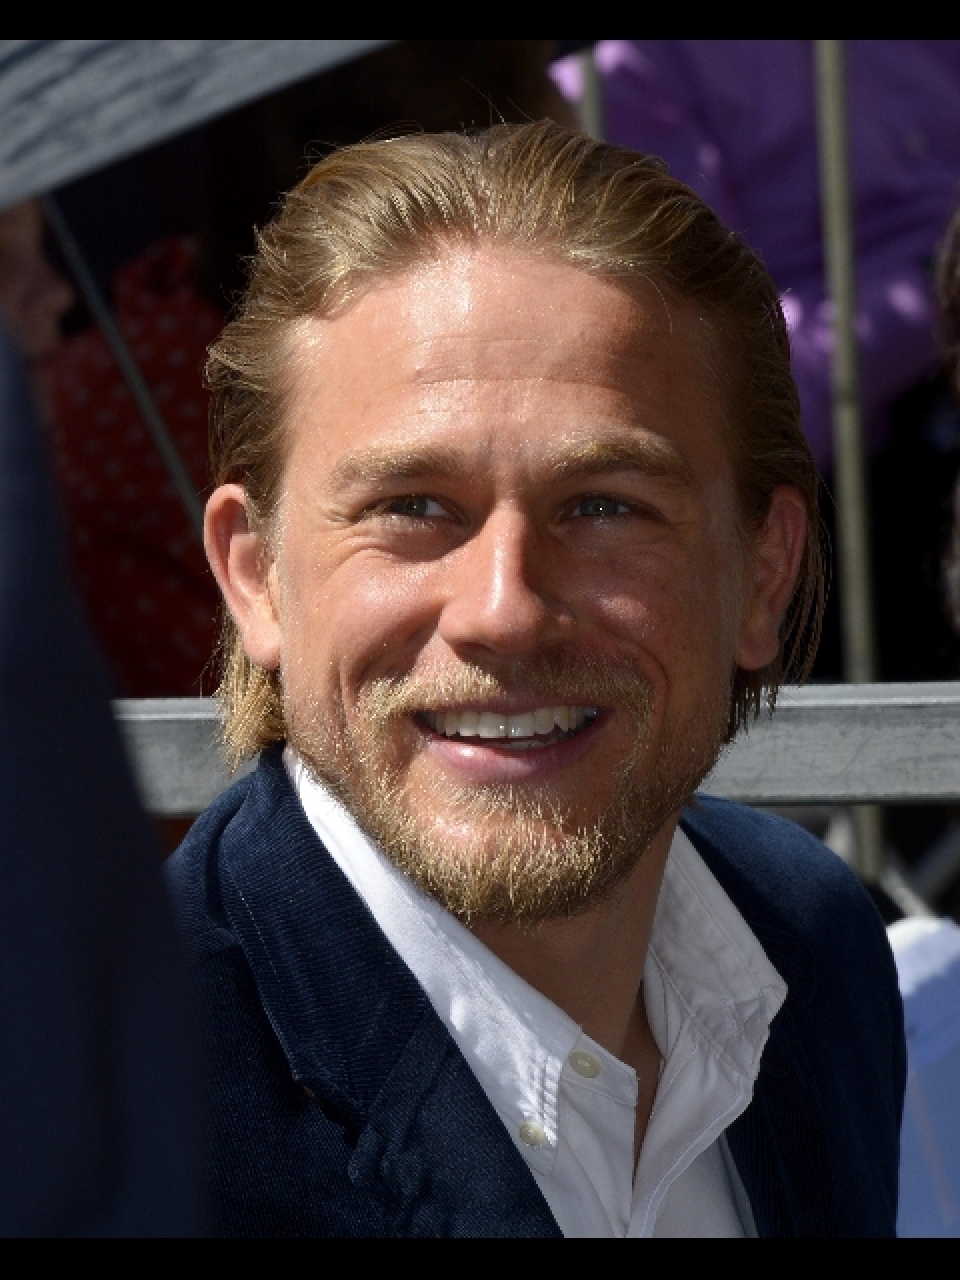 Charlie Hunnam BR on Twitter: Lindo! http://t.co/eA1264cIOn